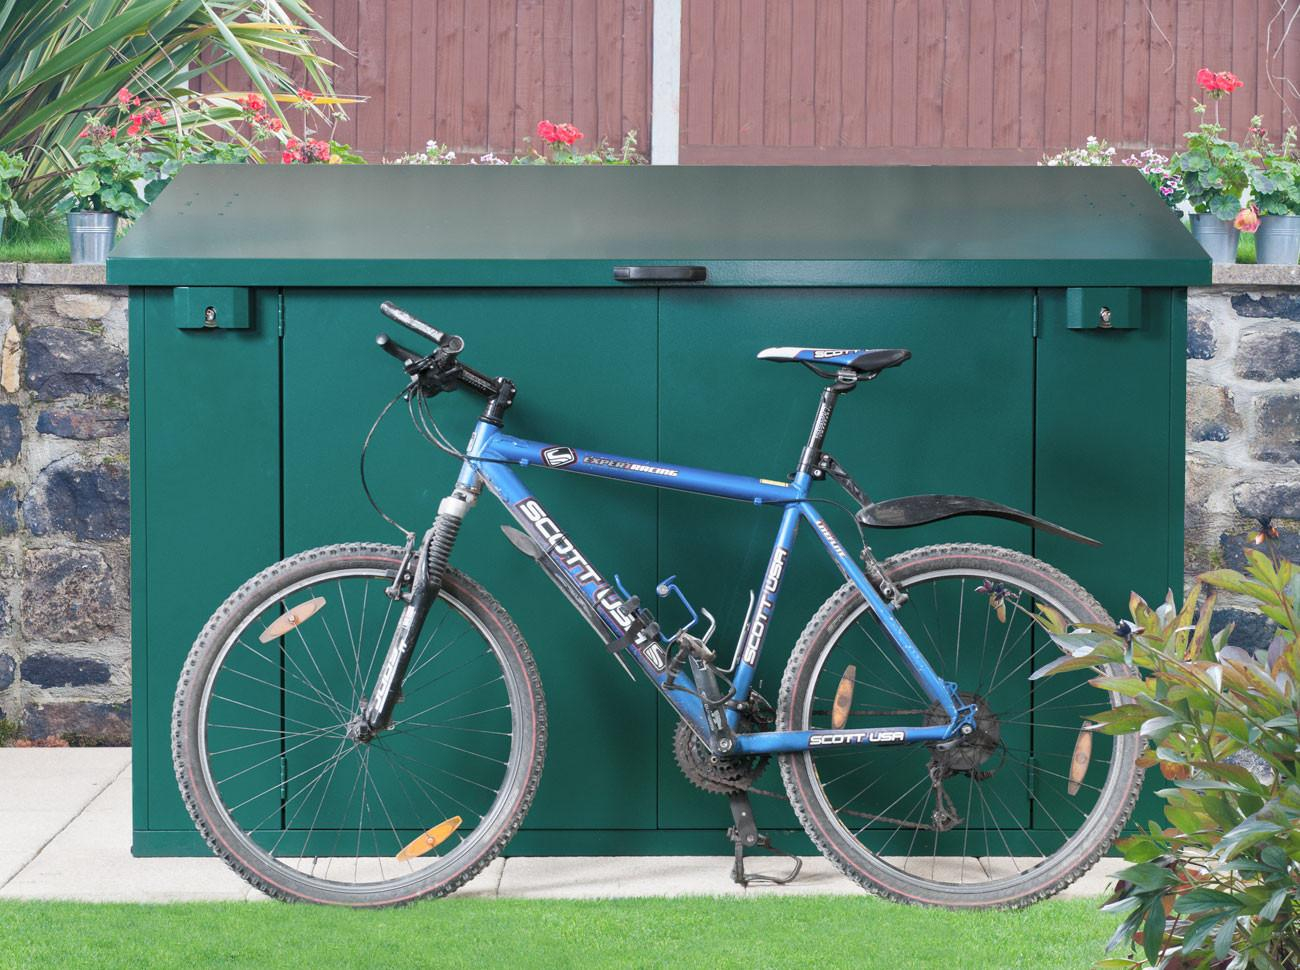 11 Best Bike Storage Accessories The Independent intended for size 1300 X 970